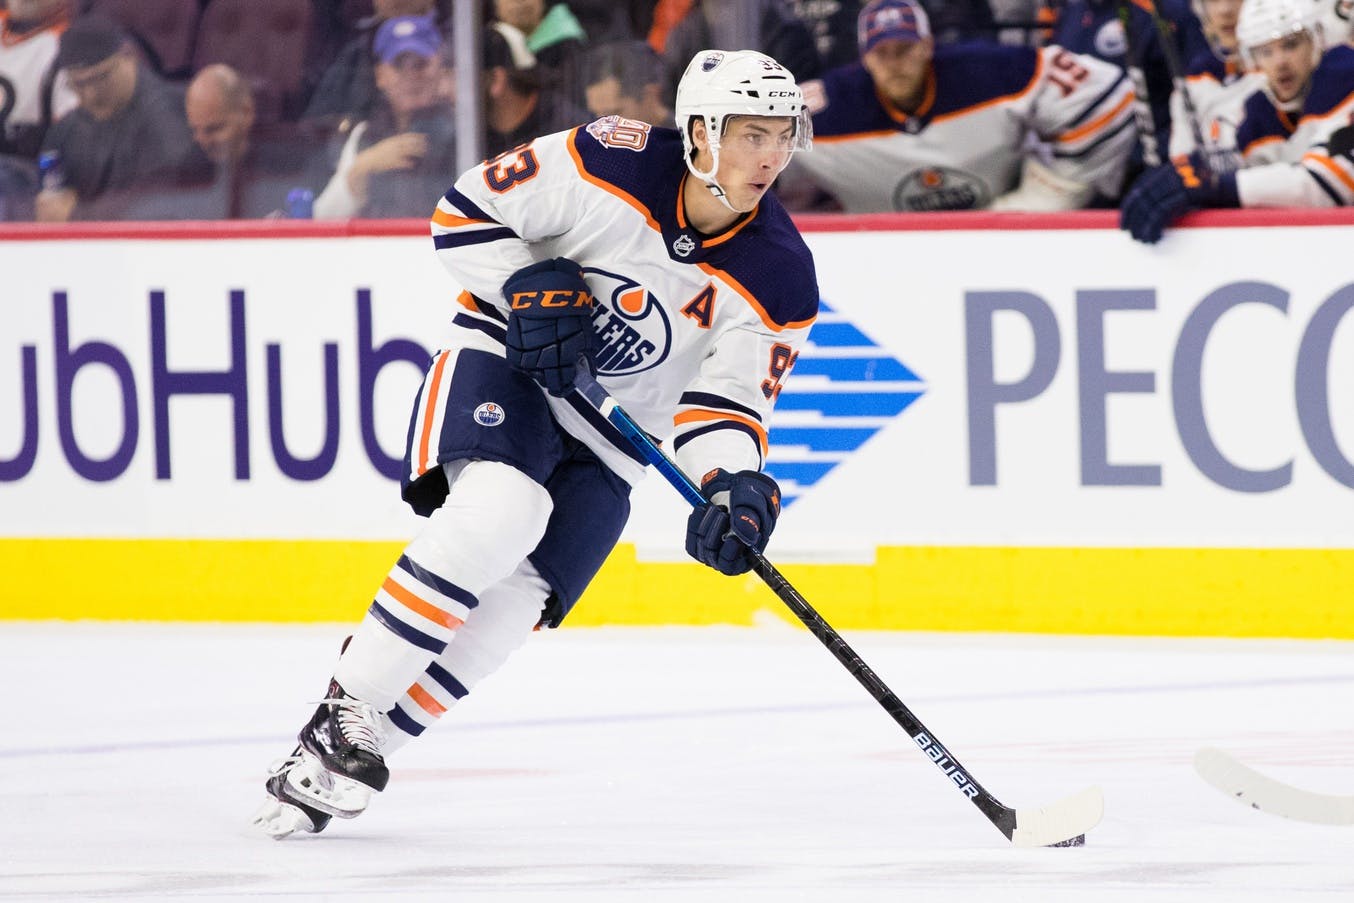 Top pick sticks: Nugent-Hopkins to remain with Oilers - NBC Sports